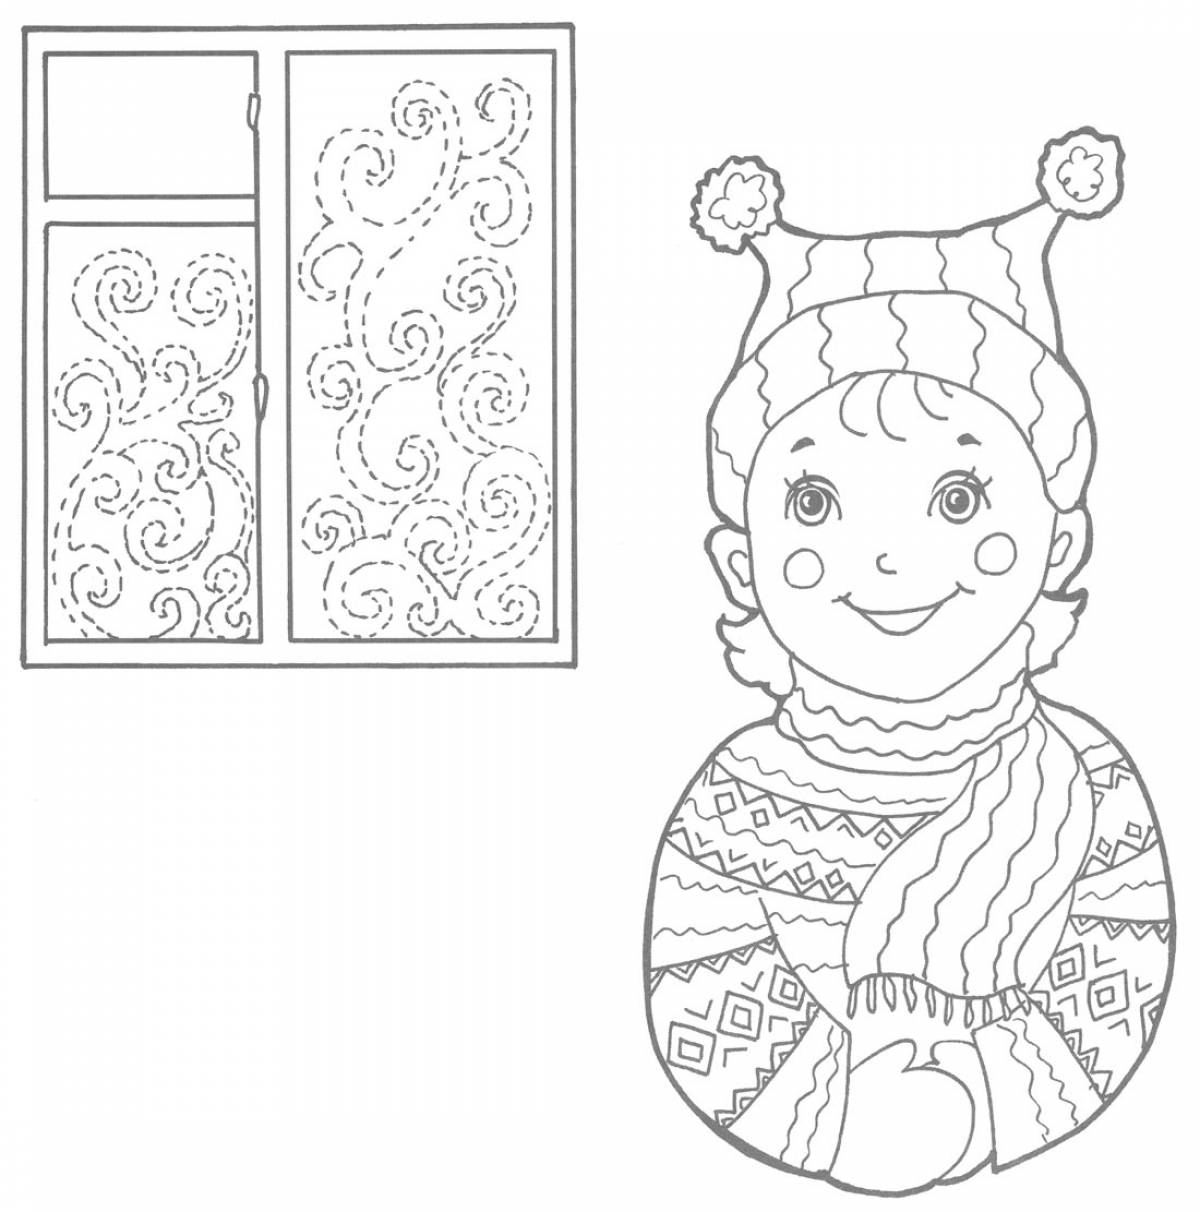 Coloring page winter patterns on the window